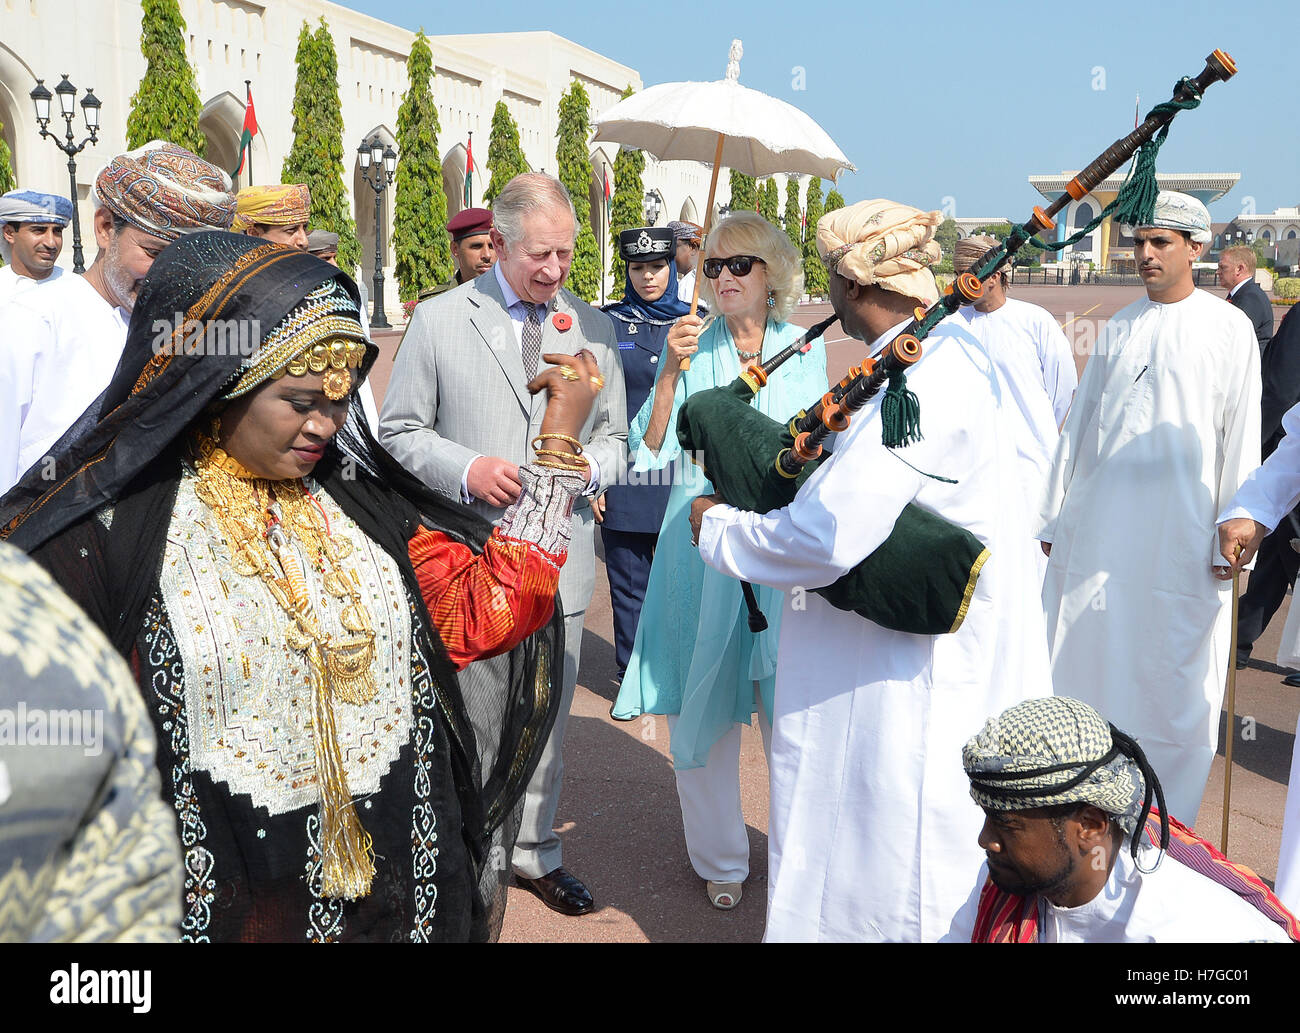 The Prince of Wales and the Duchess of Cornwall watch a man playing the bagpipes during a cultural welcome to Muscat, the capital of Oman, at the start of their official tour of the Middle East. Stock Photo